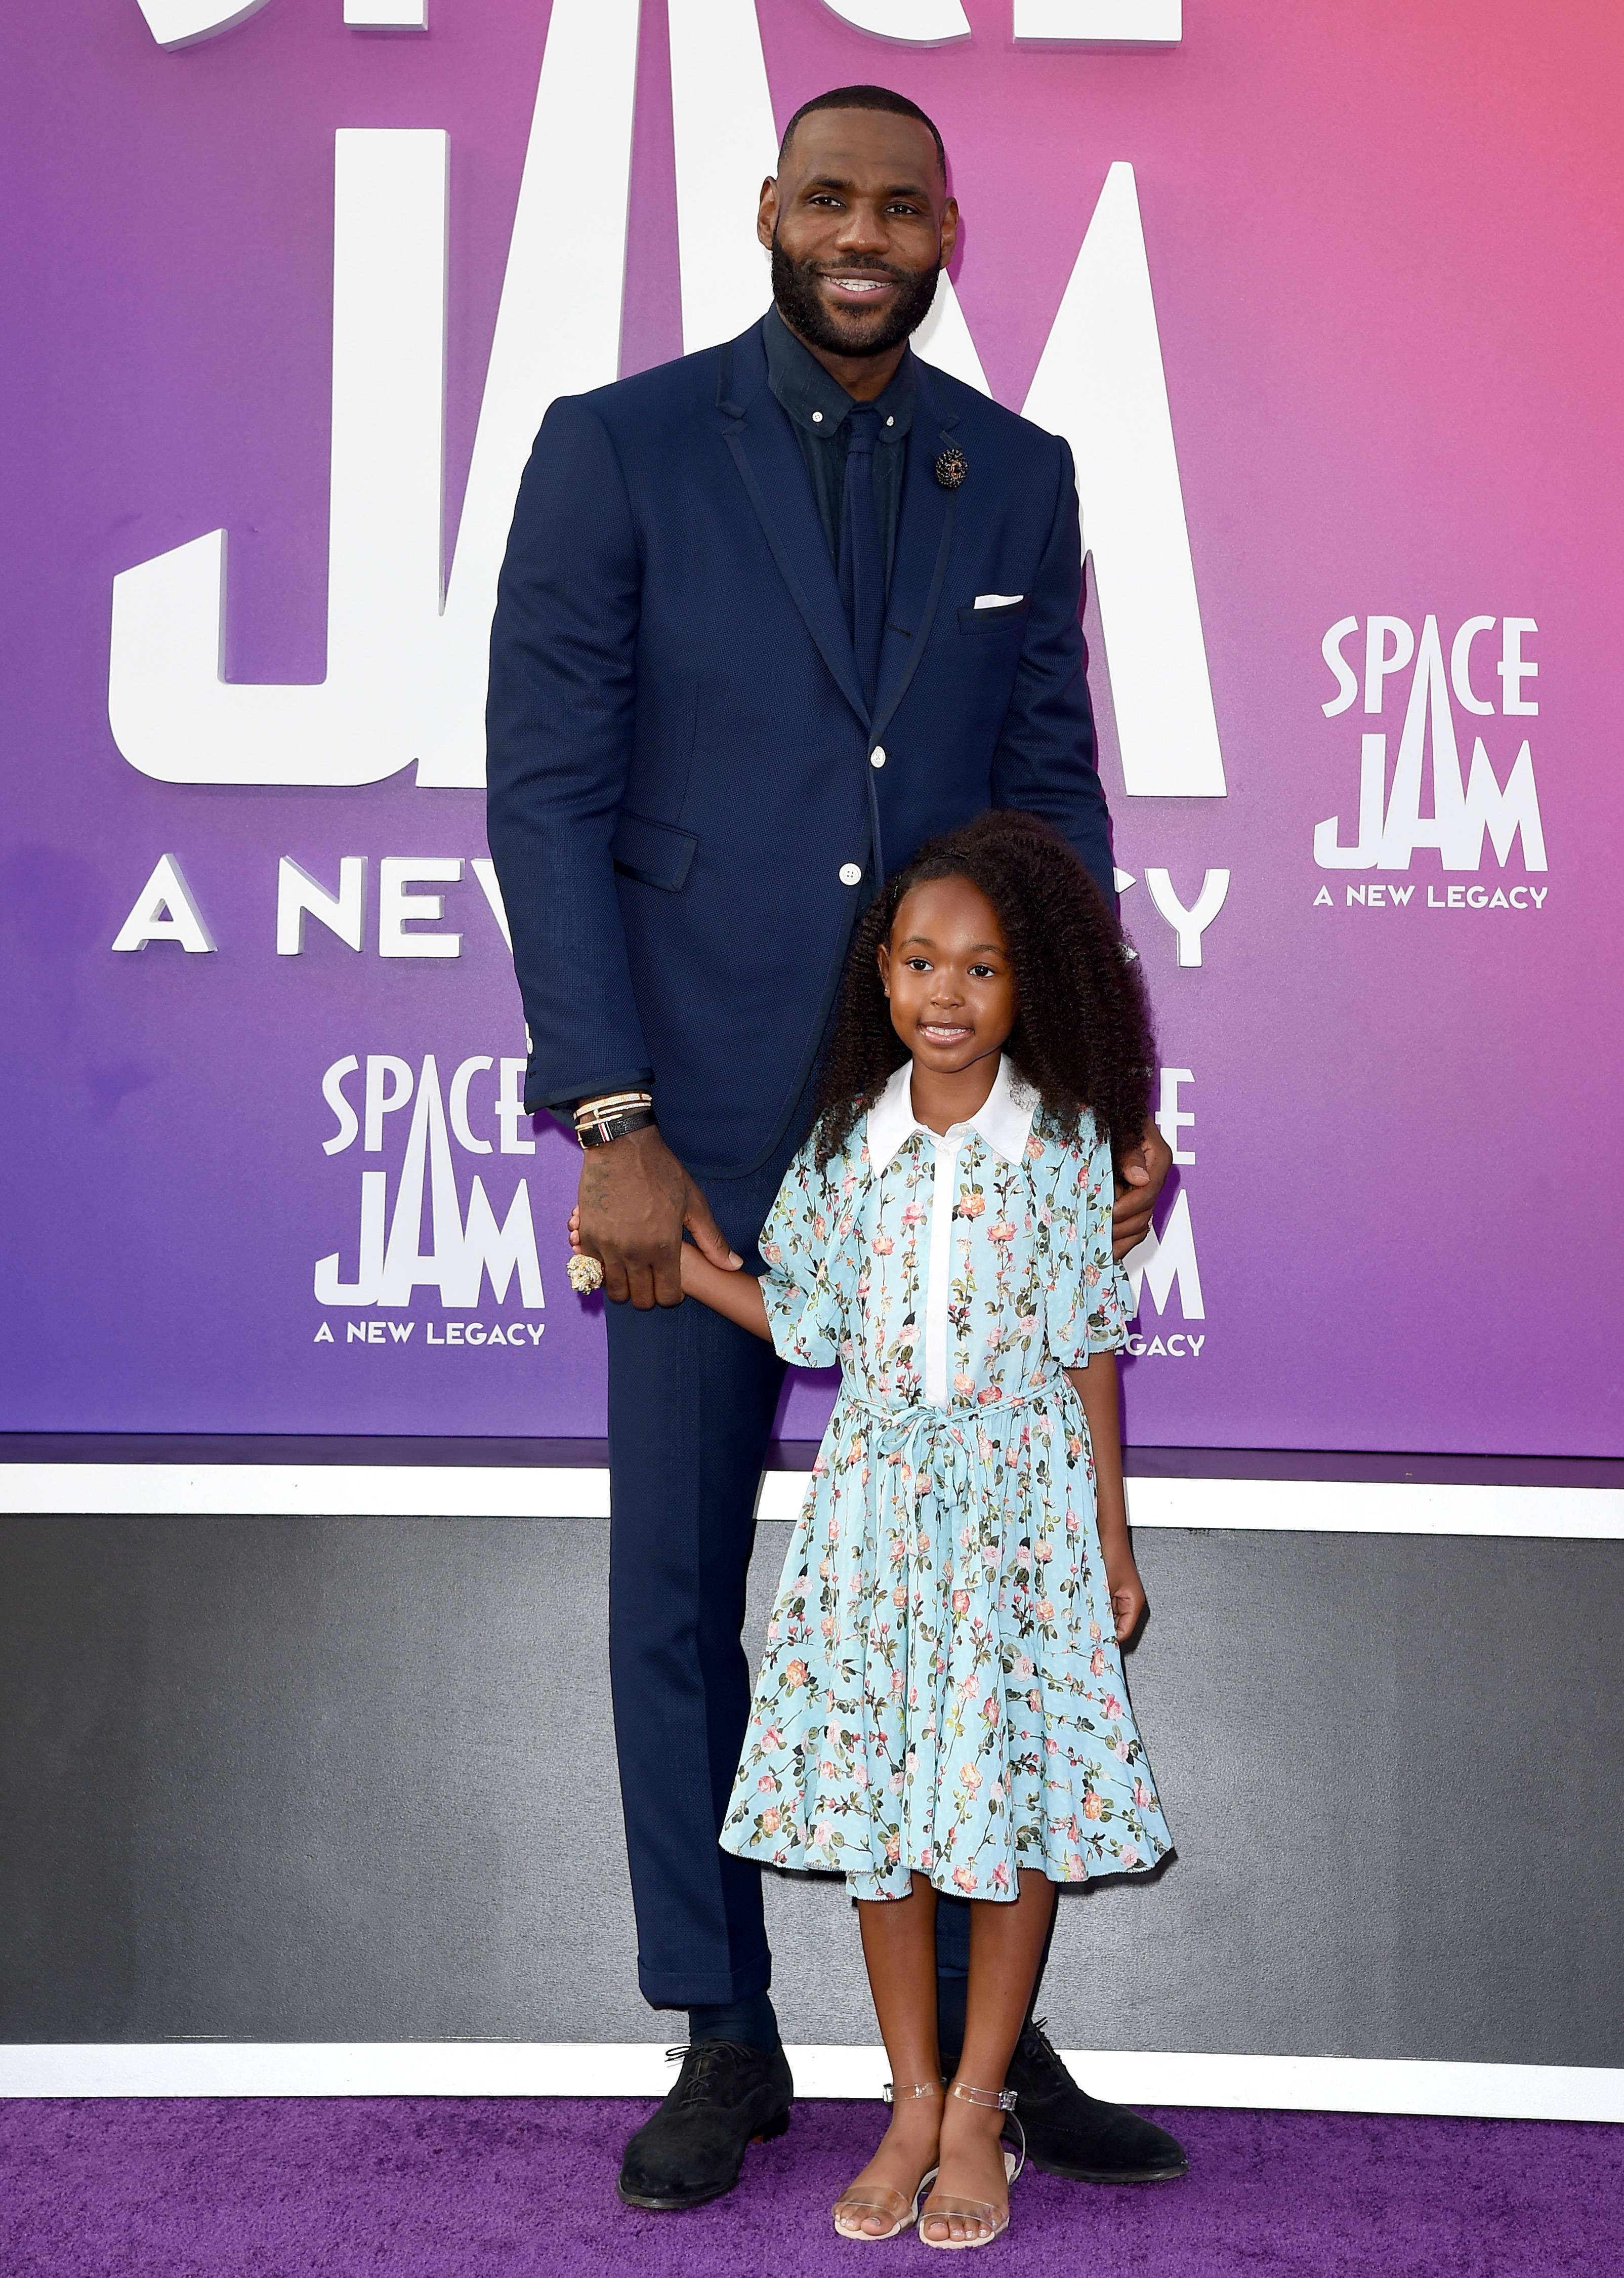 Savannah James' Daughter Zhuri, 8, Stops Her from Swearing as Family Honors LeBron  James at ESPYs